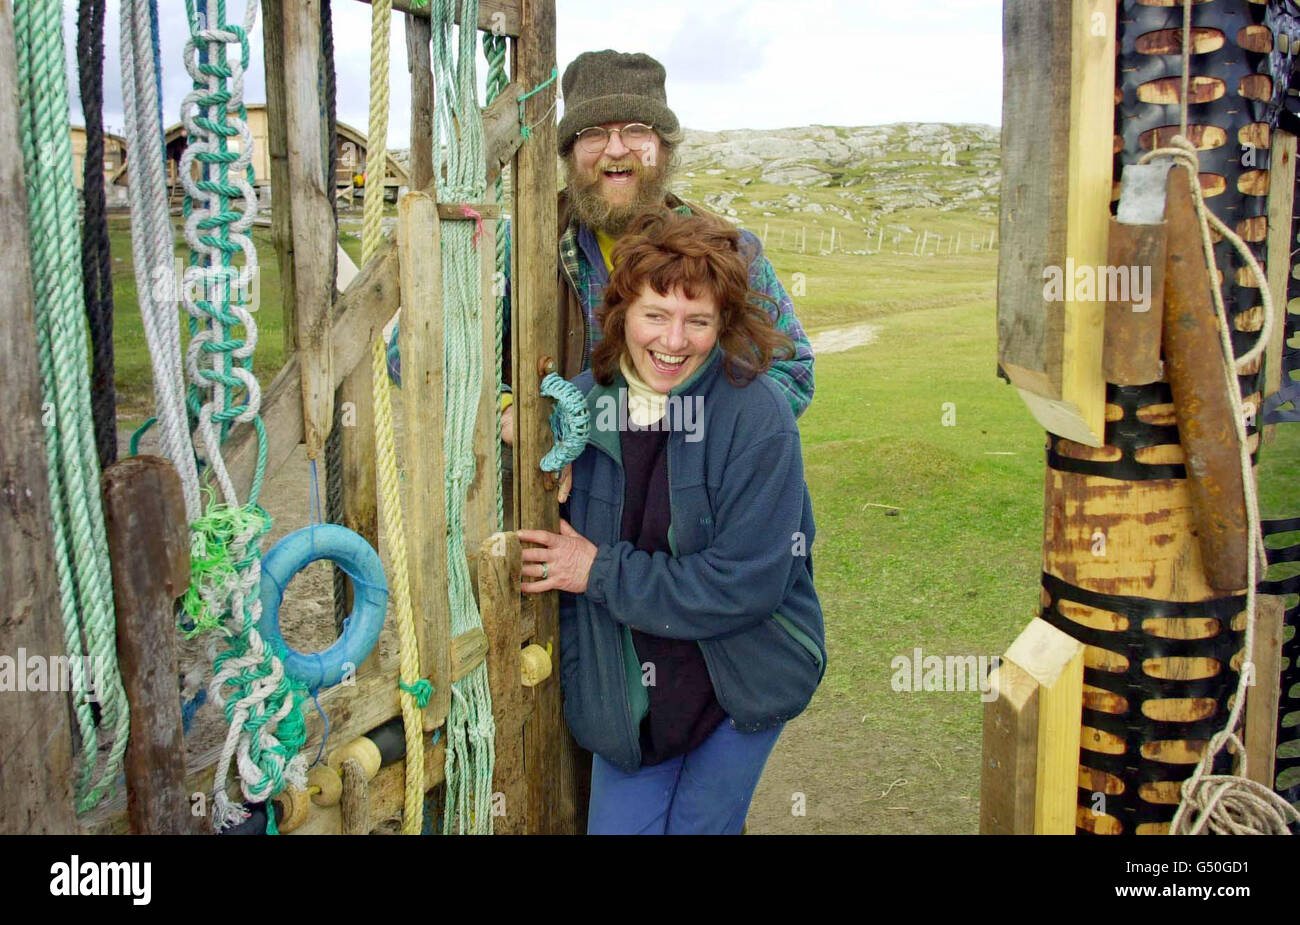 Peter Jowers and Hilary Freeman open the gate they built from items washed onto the beach, on the island of Taransay in the Western Isles of Scotland, where the group has been living since New Year's Eve as part of the BBC's Castaway 2000 programme. *07/09/2000 a seventh participant (Hiiary Freeman) has quit the program after feeling homesick for her family the BBC confirmed. Stock Photo